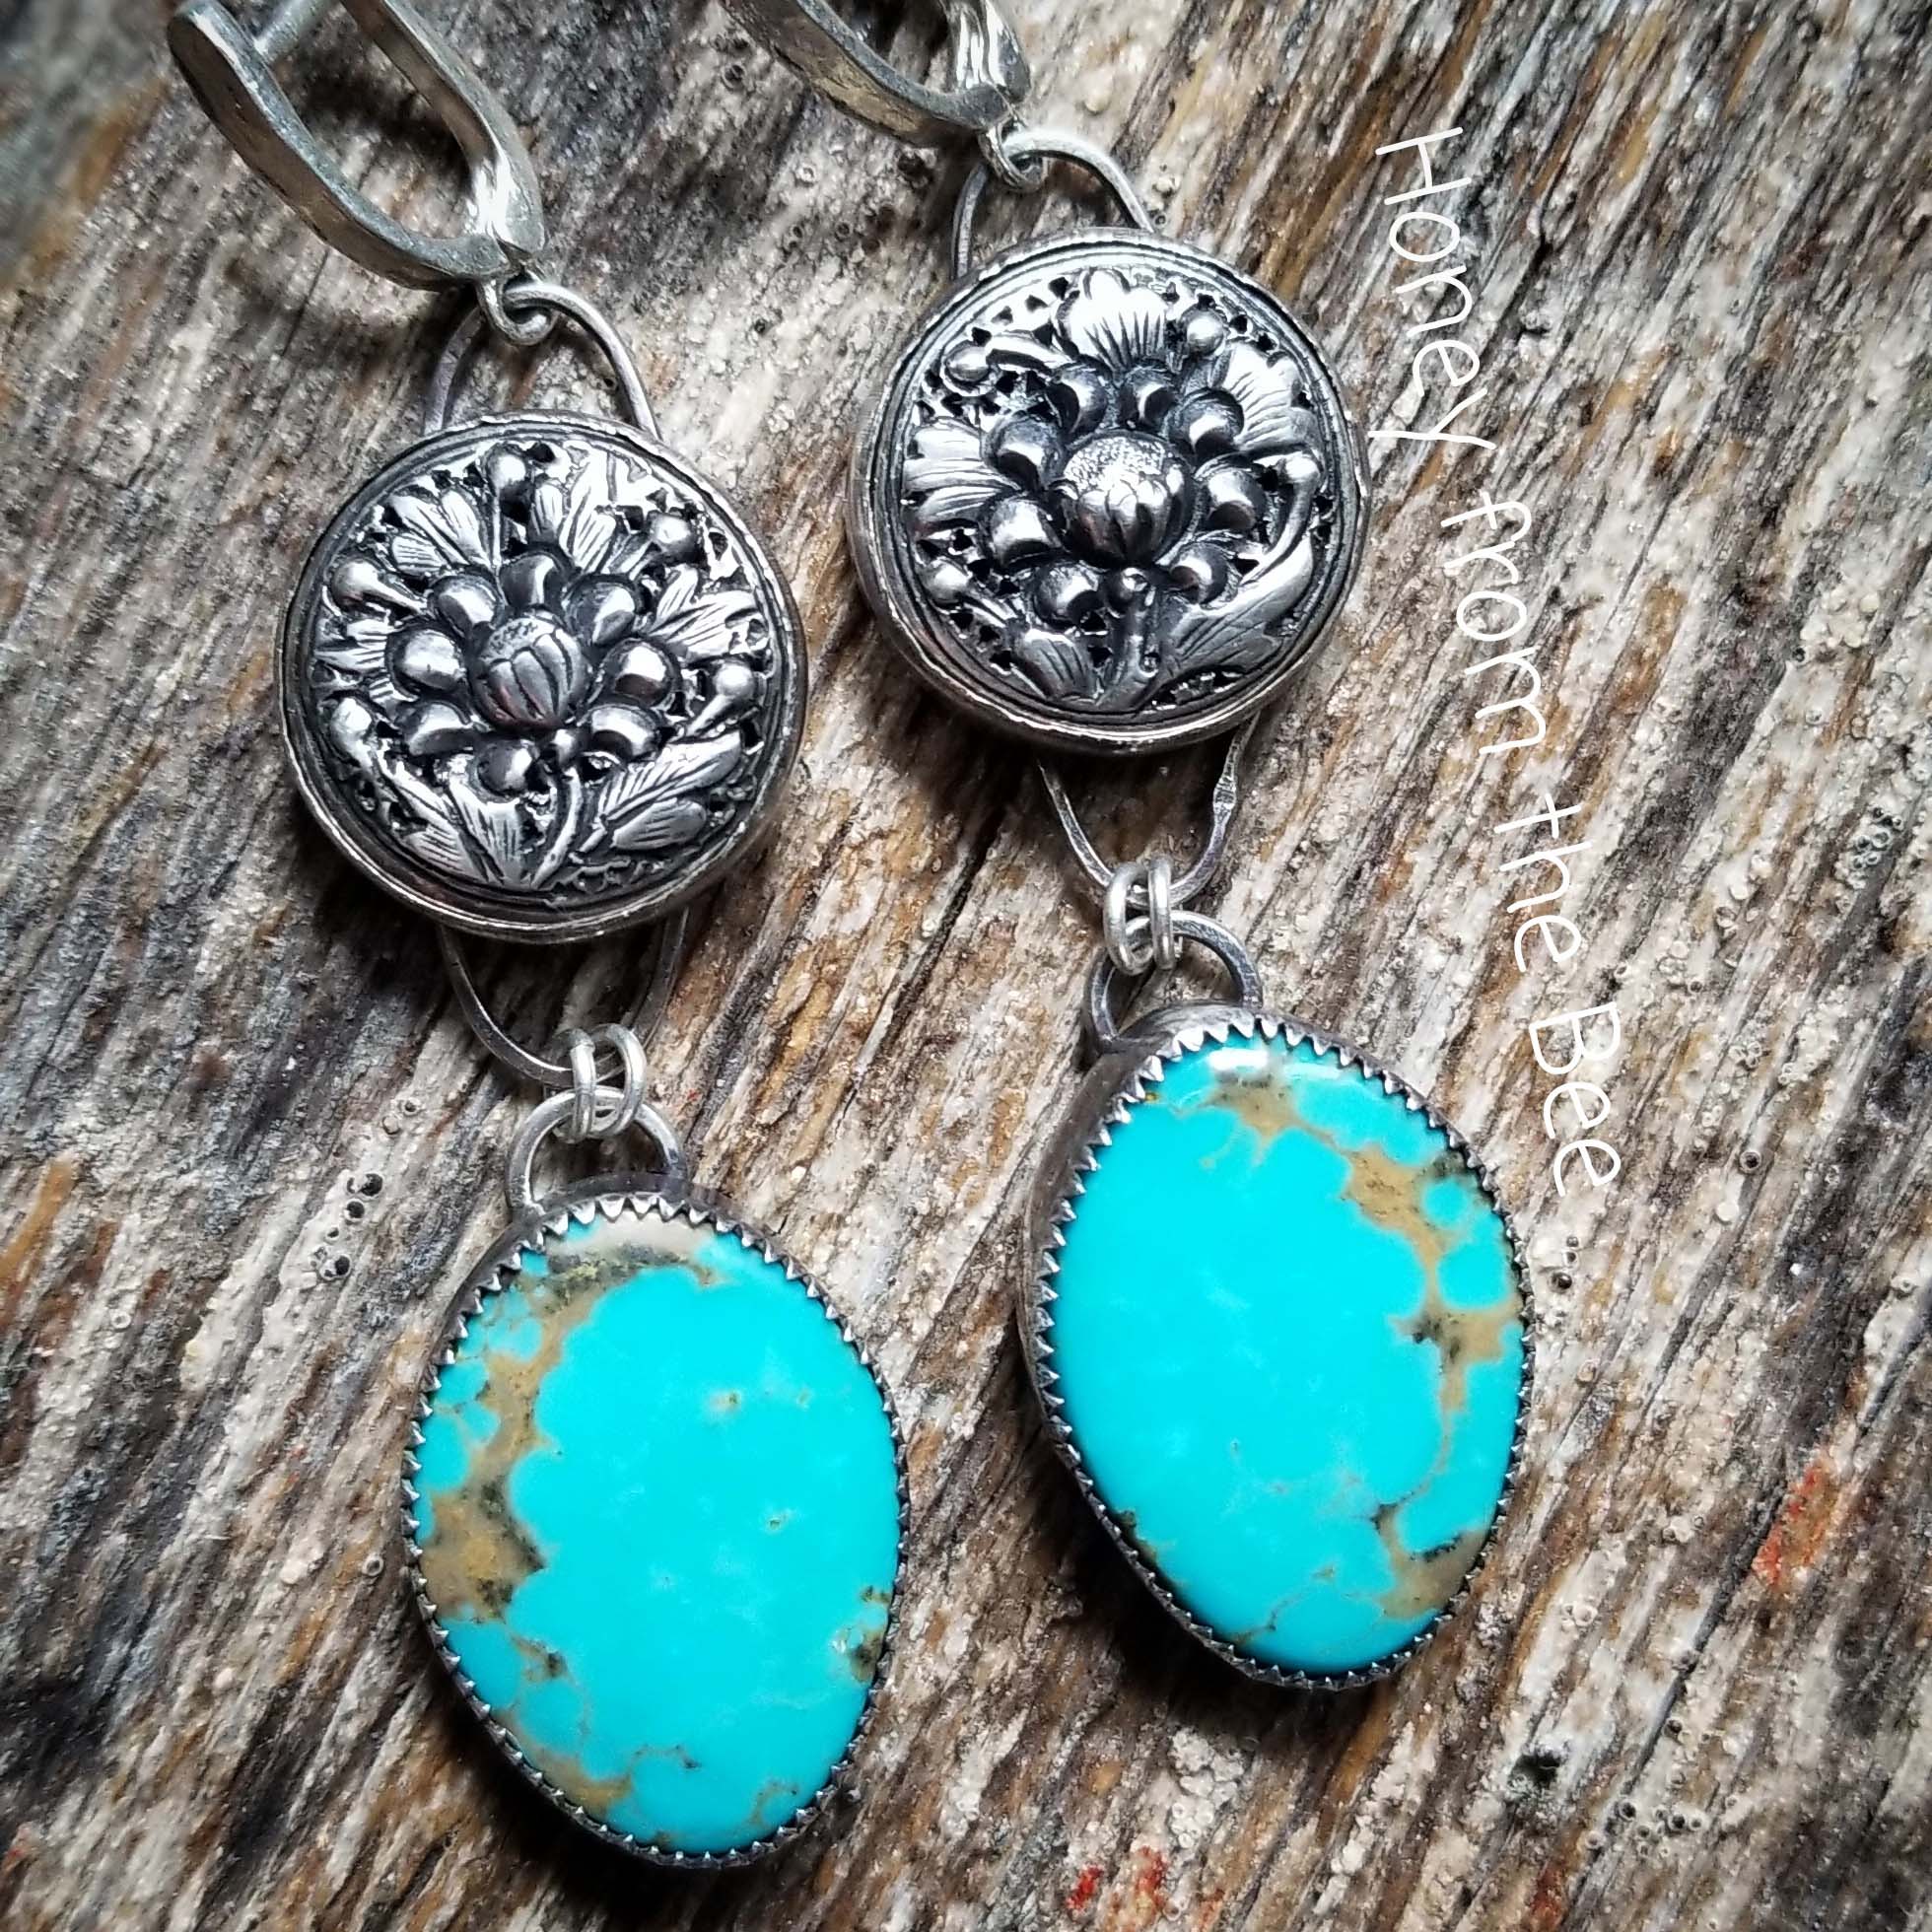 Antique sterling silver button earrings with Kingman Turquoise